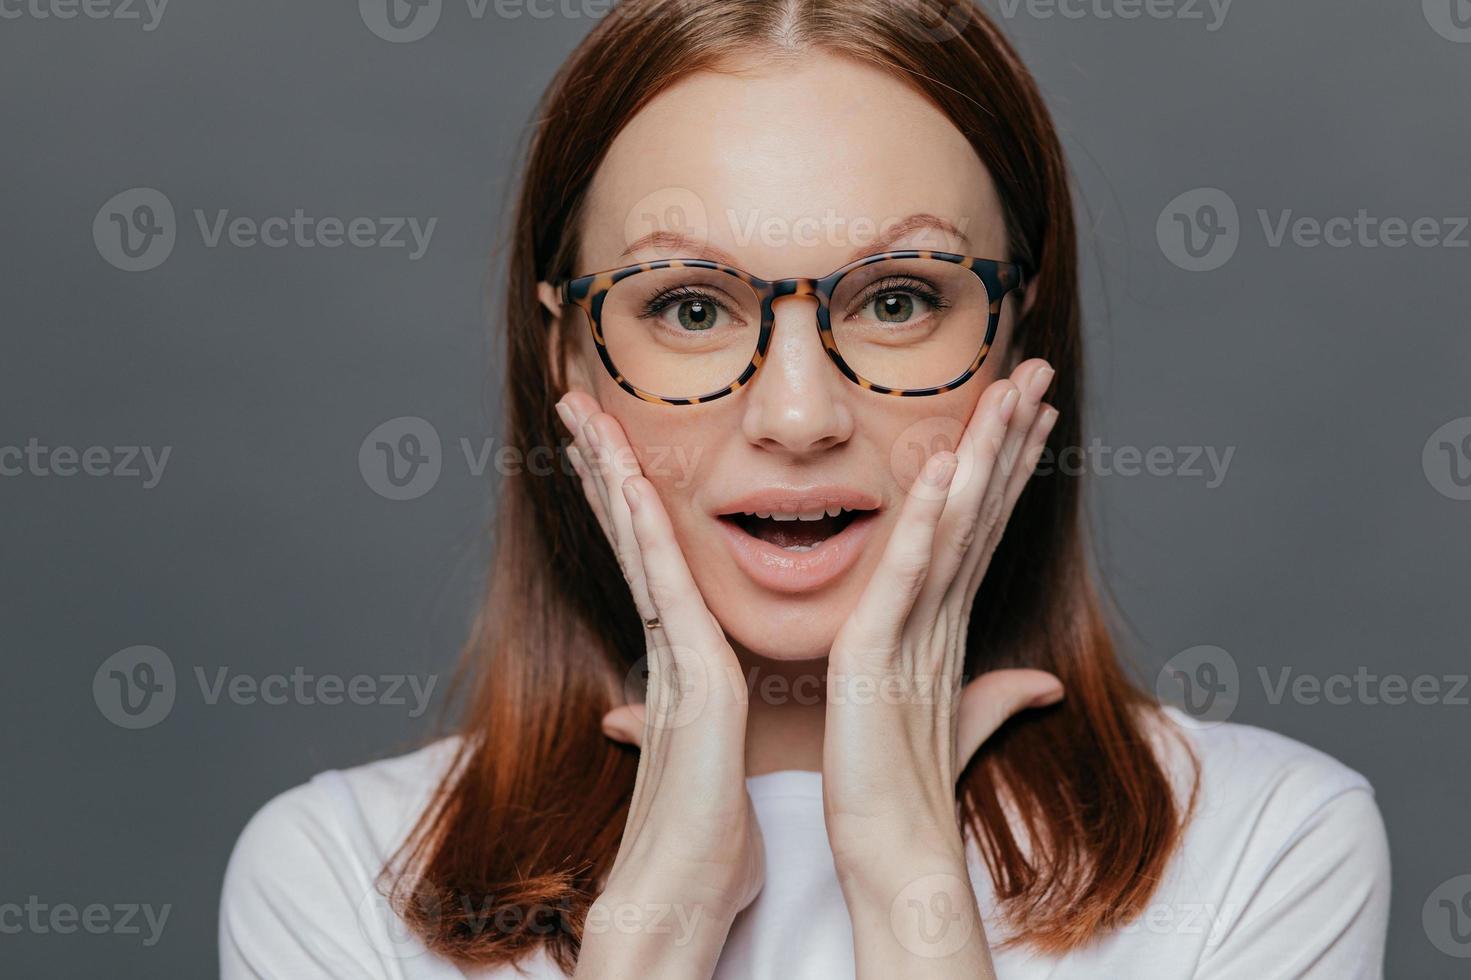 Headshot Of Surprised Young Caucasian Lady Keeps Both Palms On Her Cheeks Looks With Amazement Recieves Unexpected News Wears Spectacles White Clothing Poses Alone Against Grey Background Stock Photo At Vecteezy